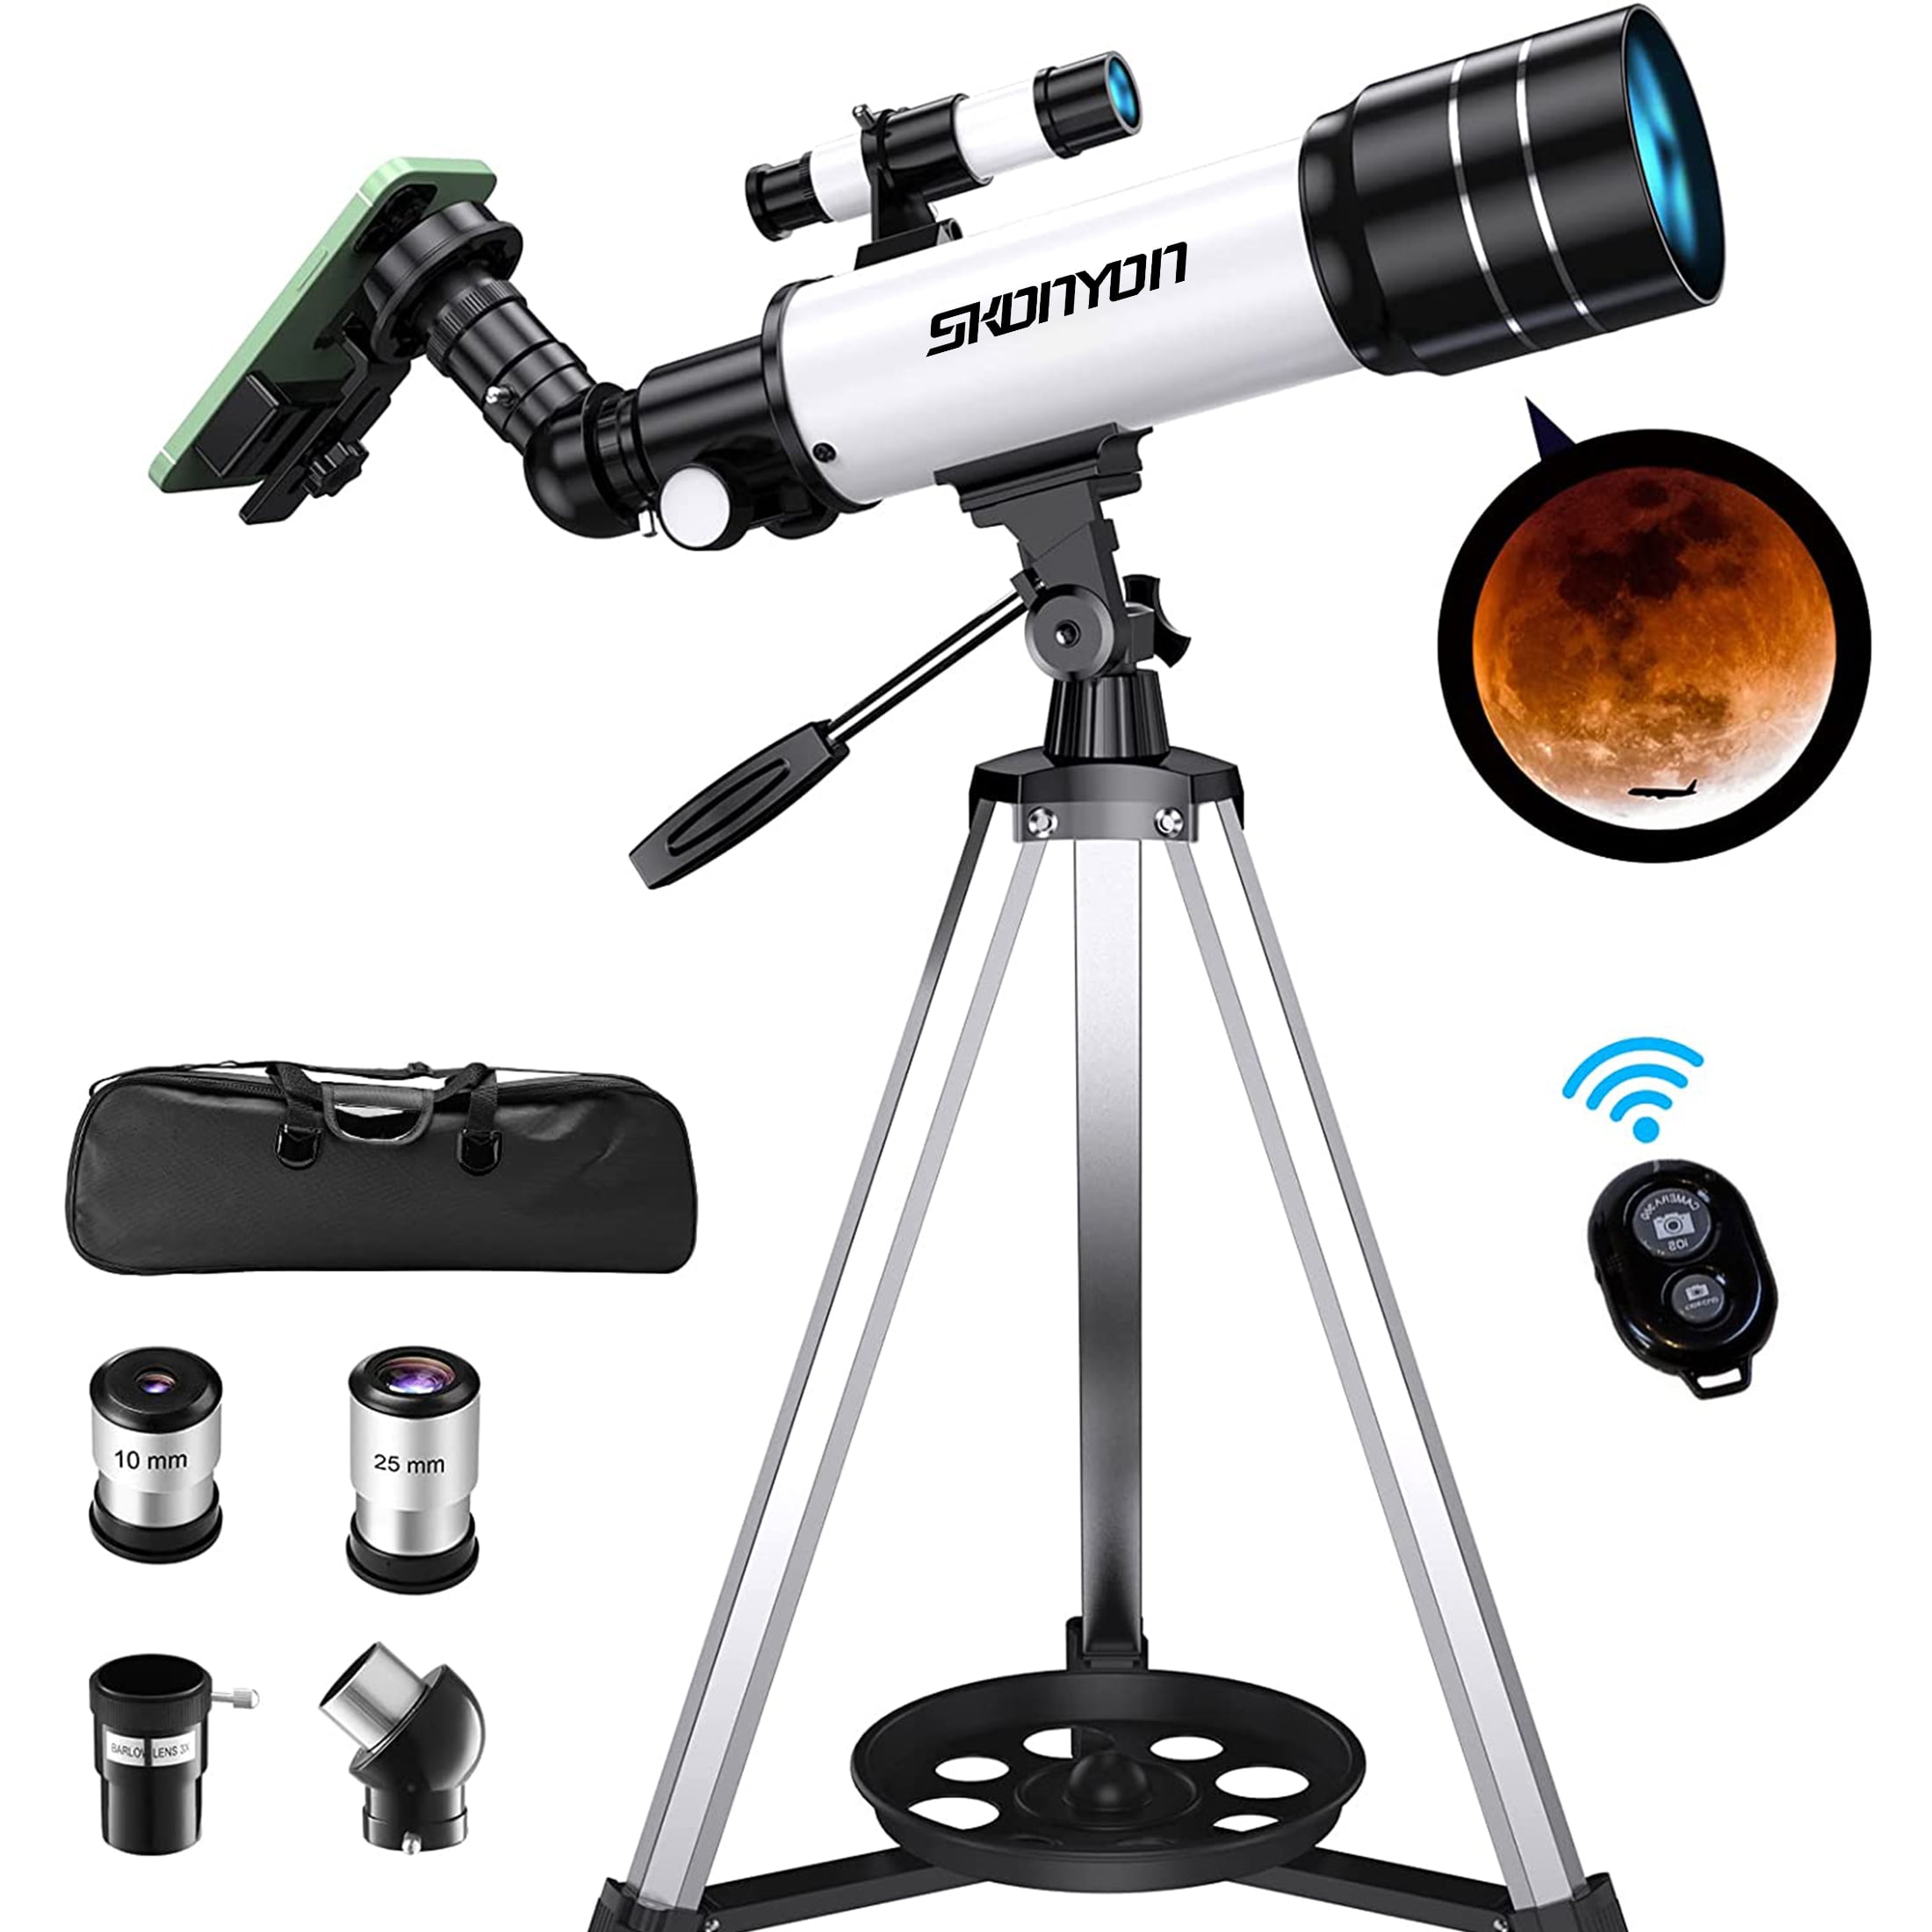 World Optical Telescope for Adults Kids Astronomy Beginners 400/70mm Travel Scope Refractor Telescopes with Adjustable Tripod Phone Adapter Finderscope Erect-Image Diagonal Moon Mirror Two Eyepieces 